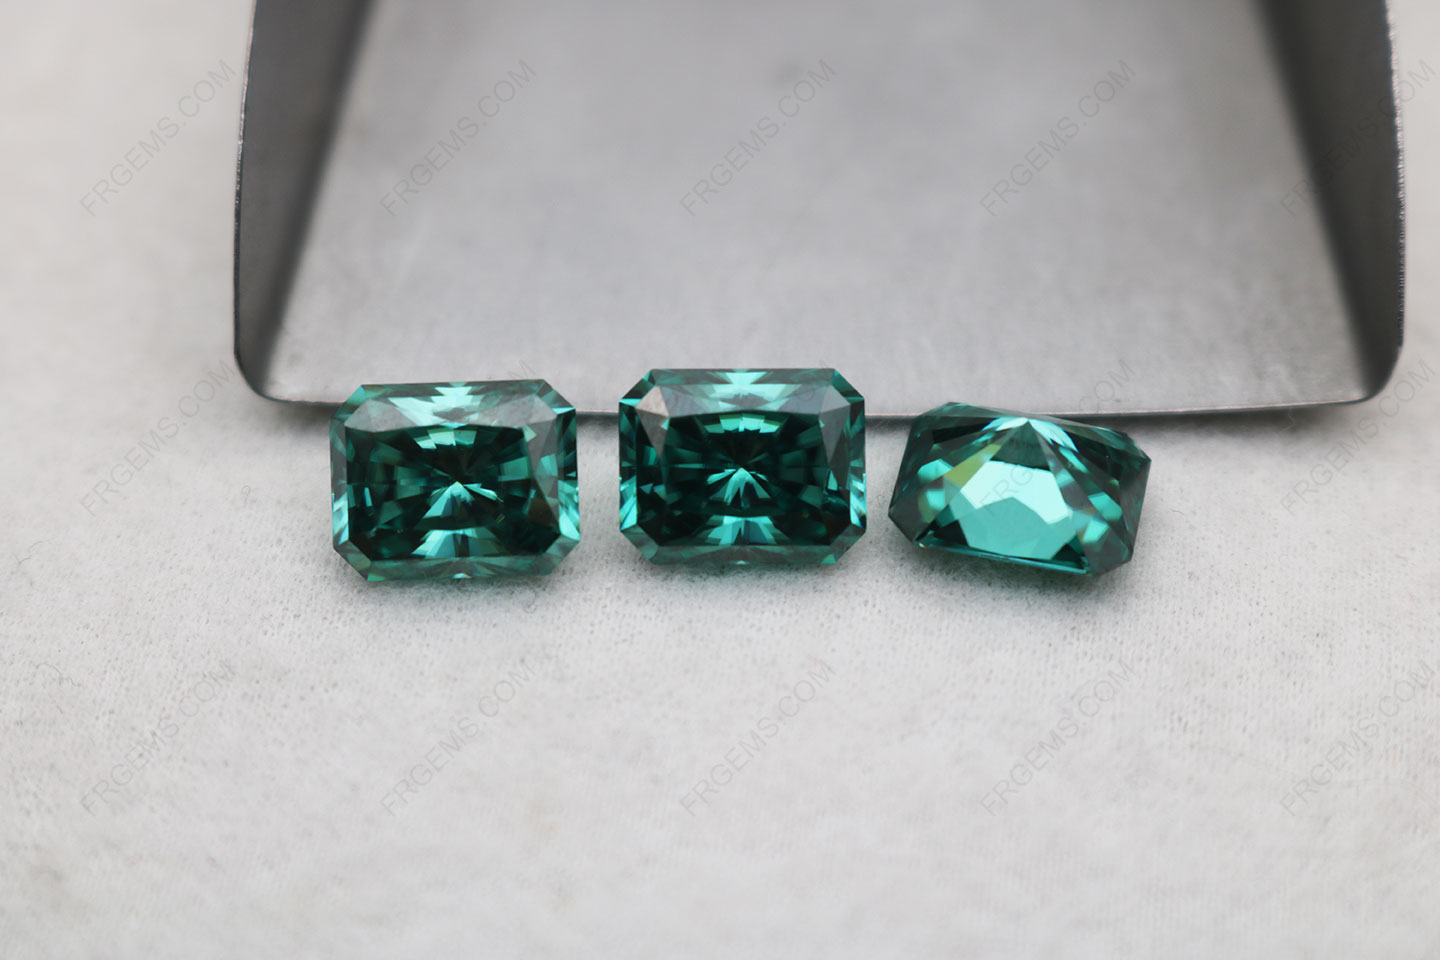 Wholesale Loose Moissanite Green Color Octagon Radiant Cut 10x8mm gemstones from China